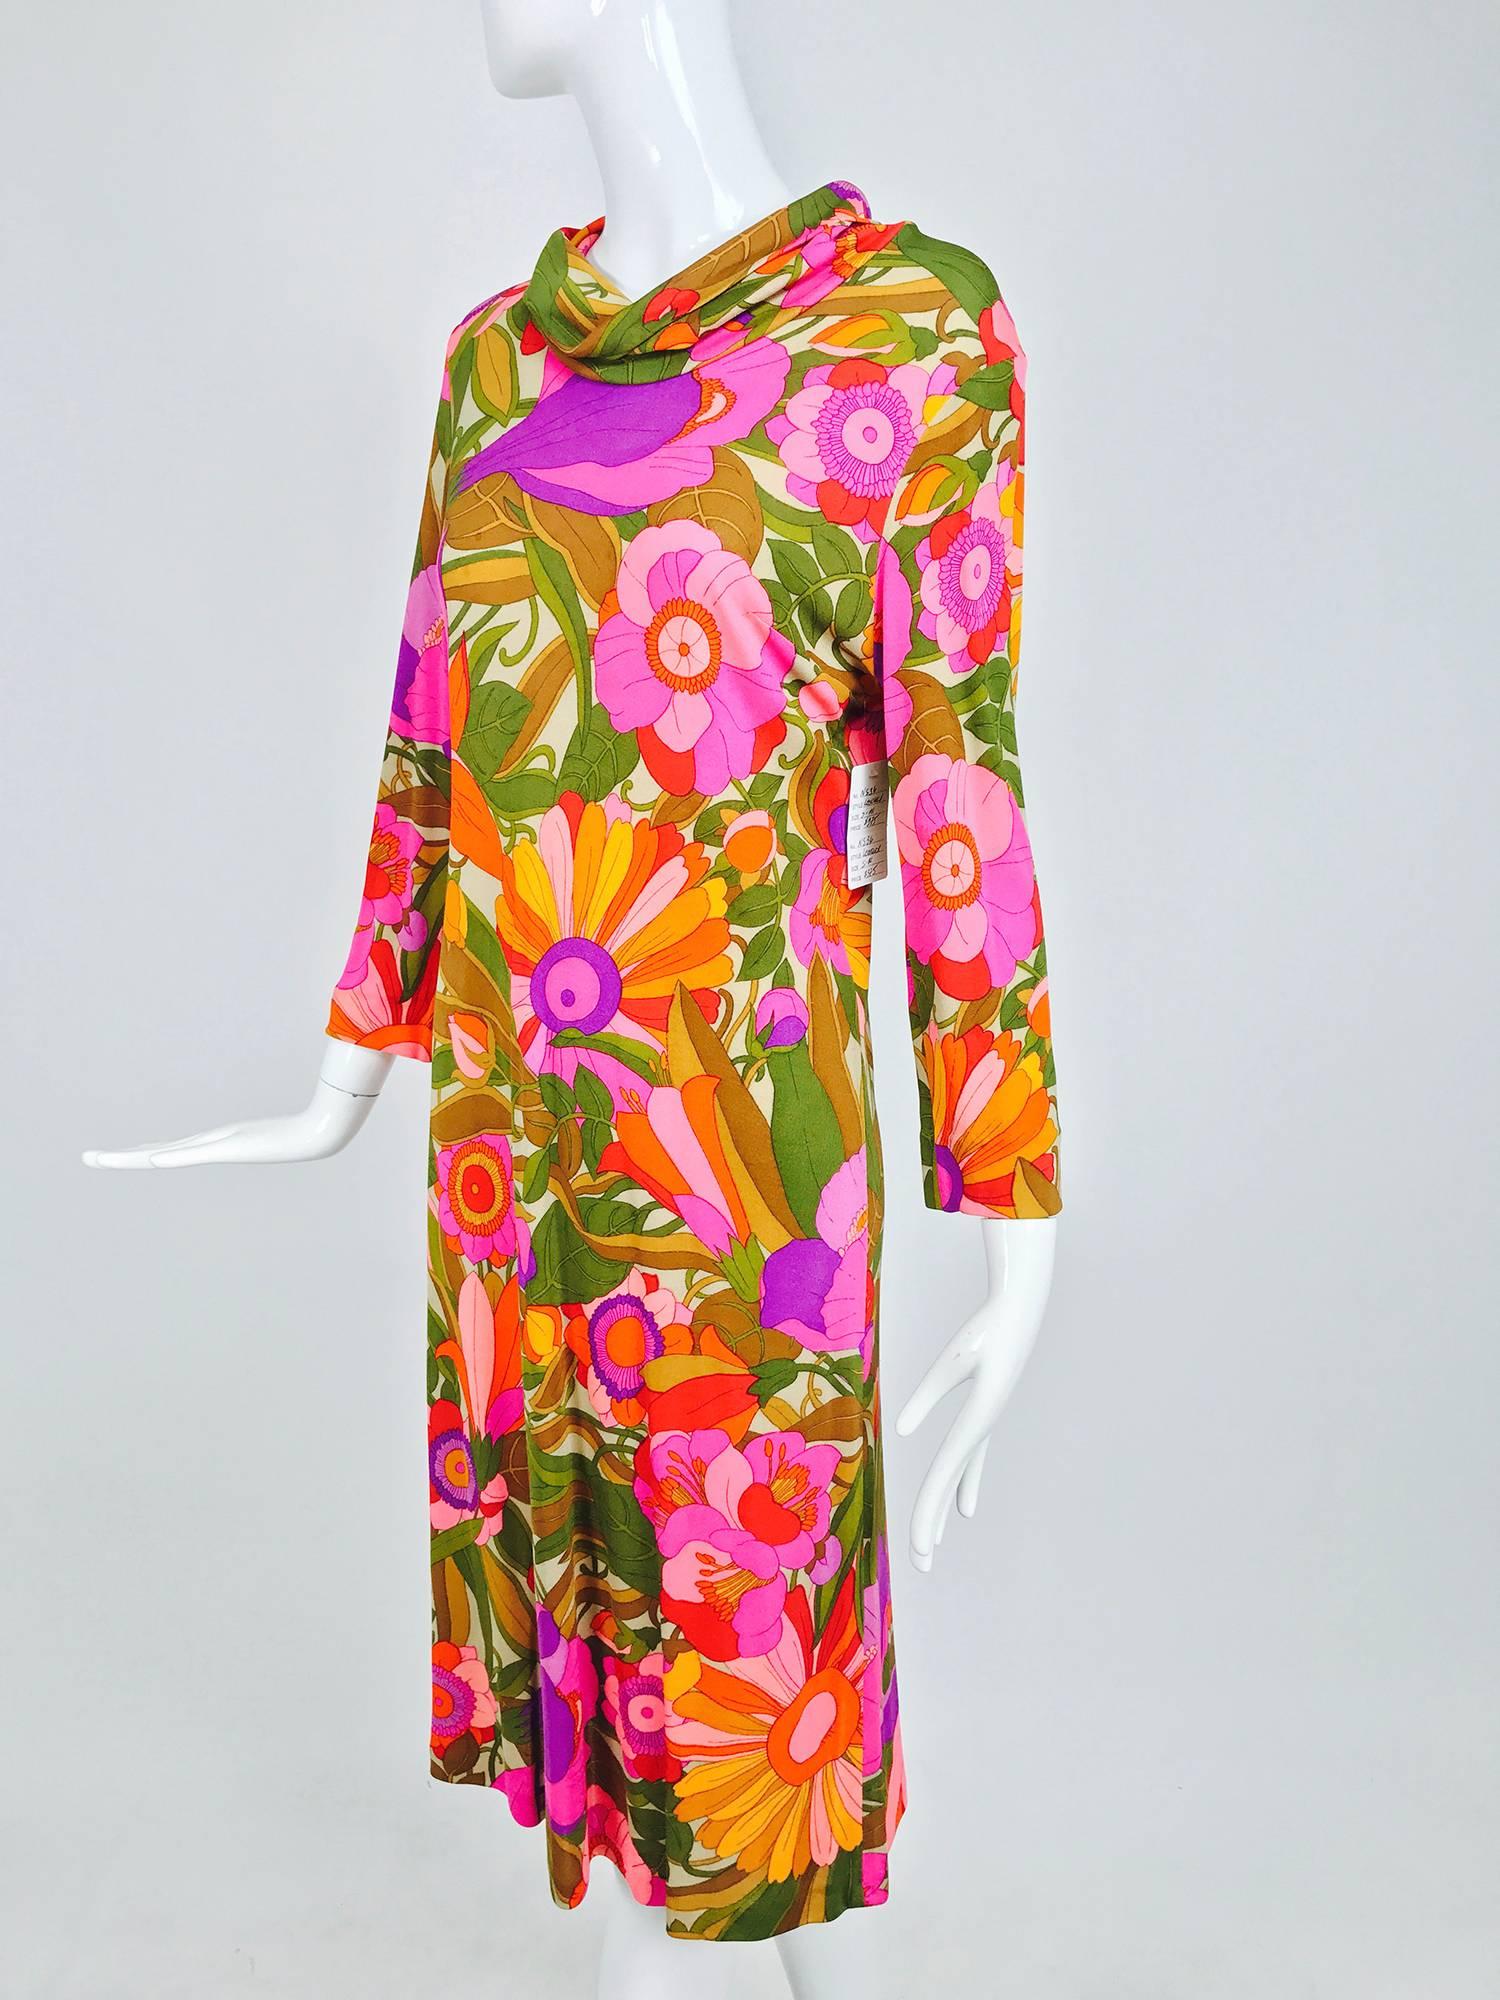 Silk jersey dress in a vibrant fantasy floral pattern...Pull on dress has a cowl neckline and long sleeves...Unlined...Inside tag and marked 4, there is no Leonard label...Fits a size Medium...

In excellent wearable condition... All our clothing is